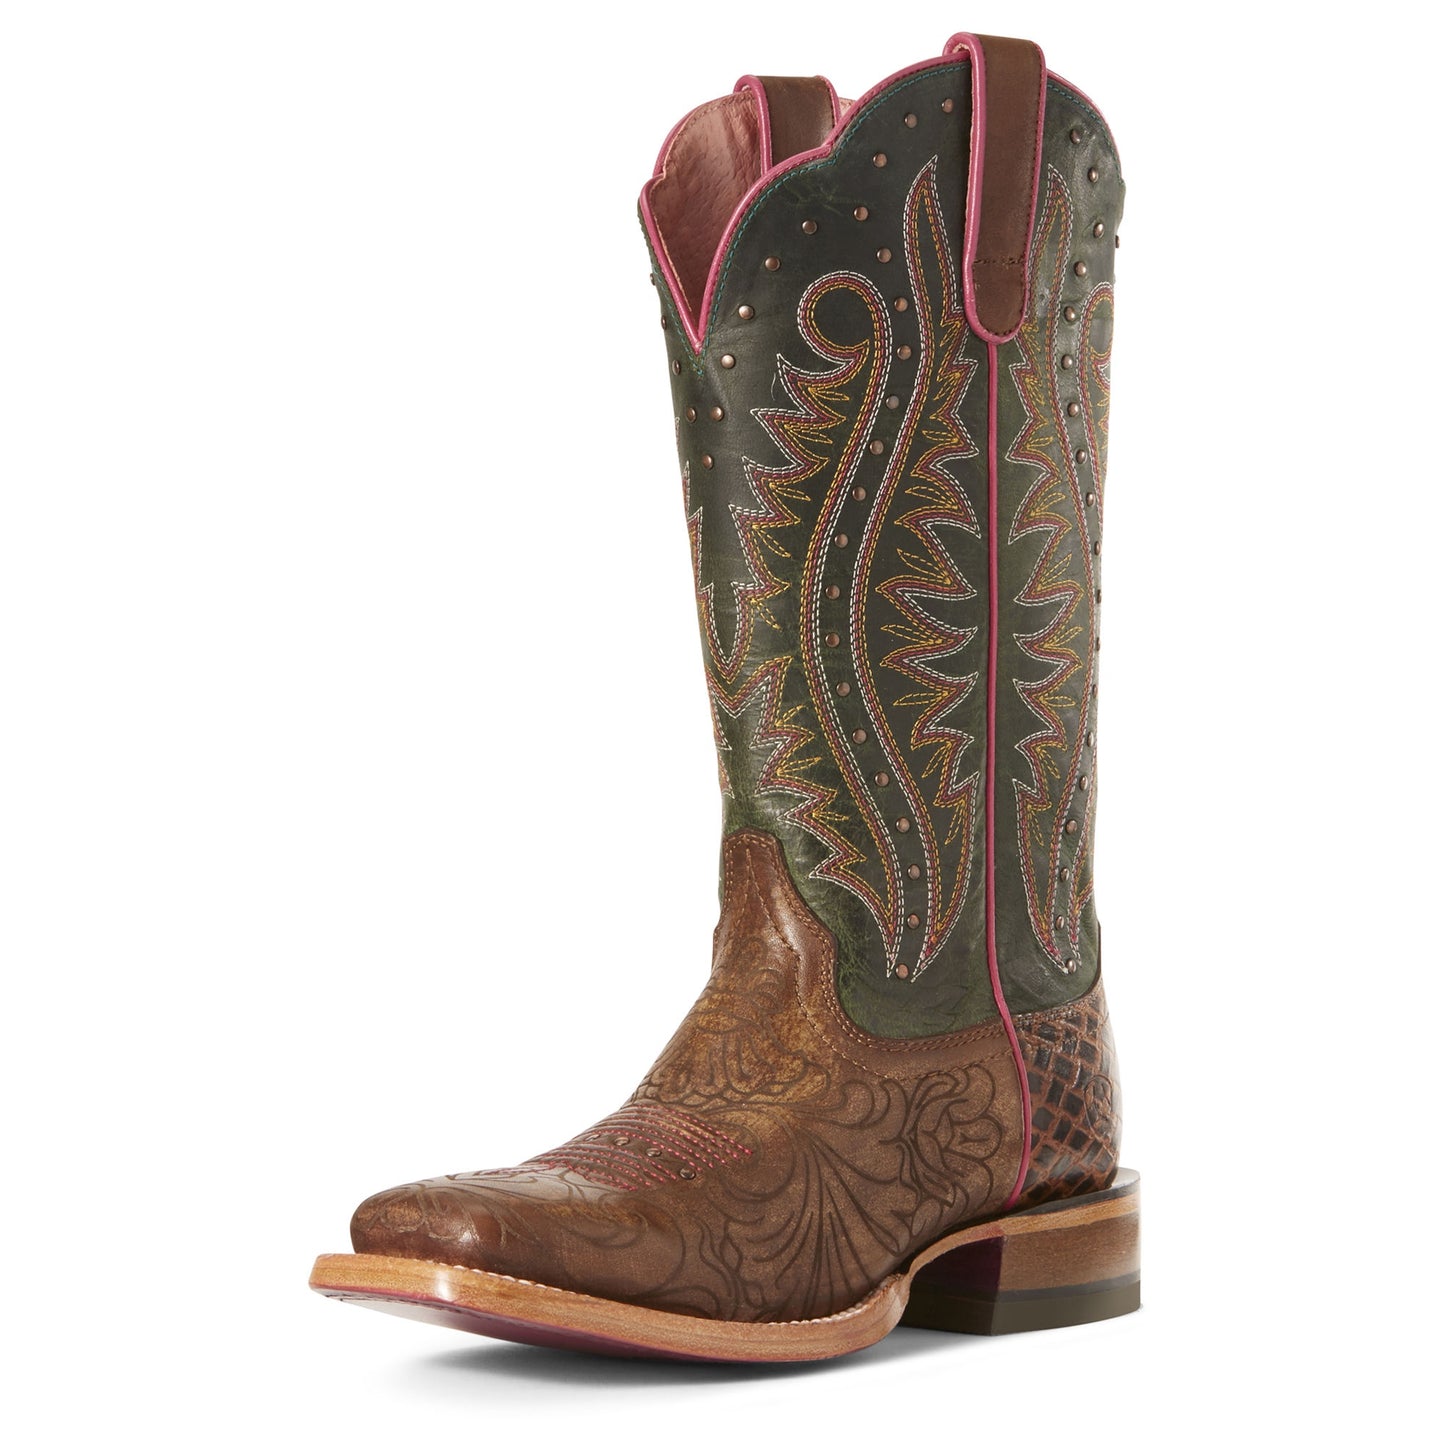 Women's Ariat Montage Lasered Floral Western Boots